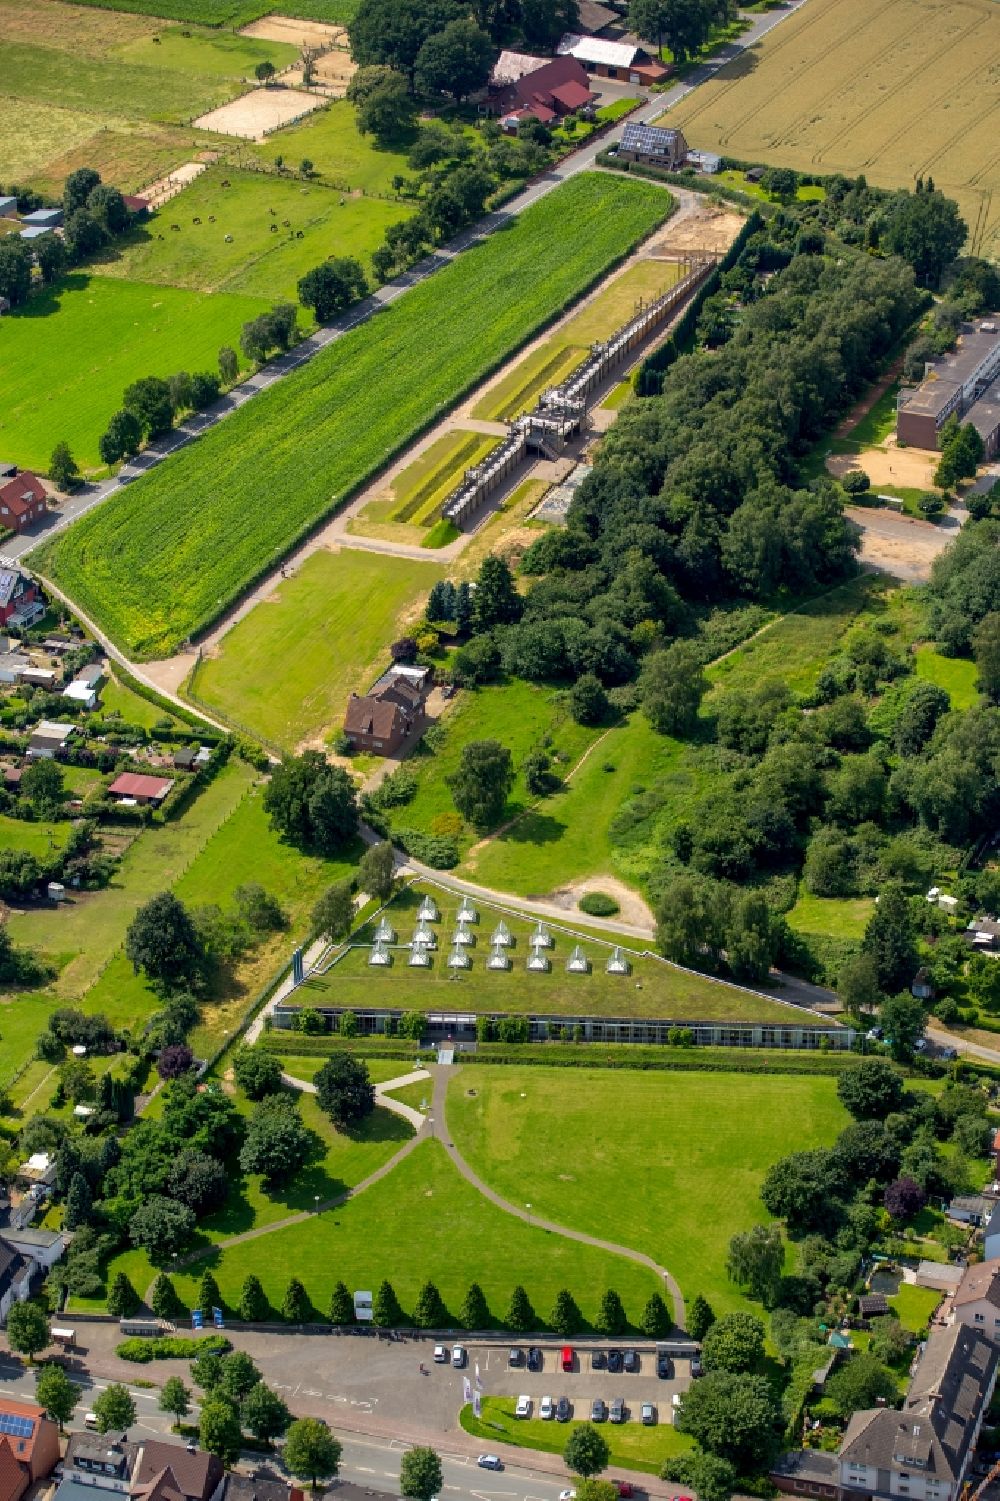 Aerial image Haltern am See - Museum building ensemble of LWL Roman Museum in Haltern am See in the state of North Rhine-Westphalia. Here the most important finds from all Roman camps along the lip are issued